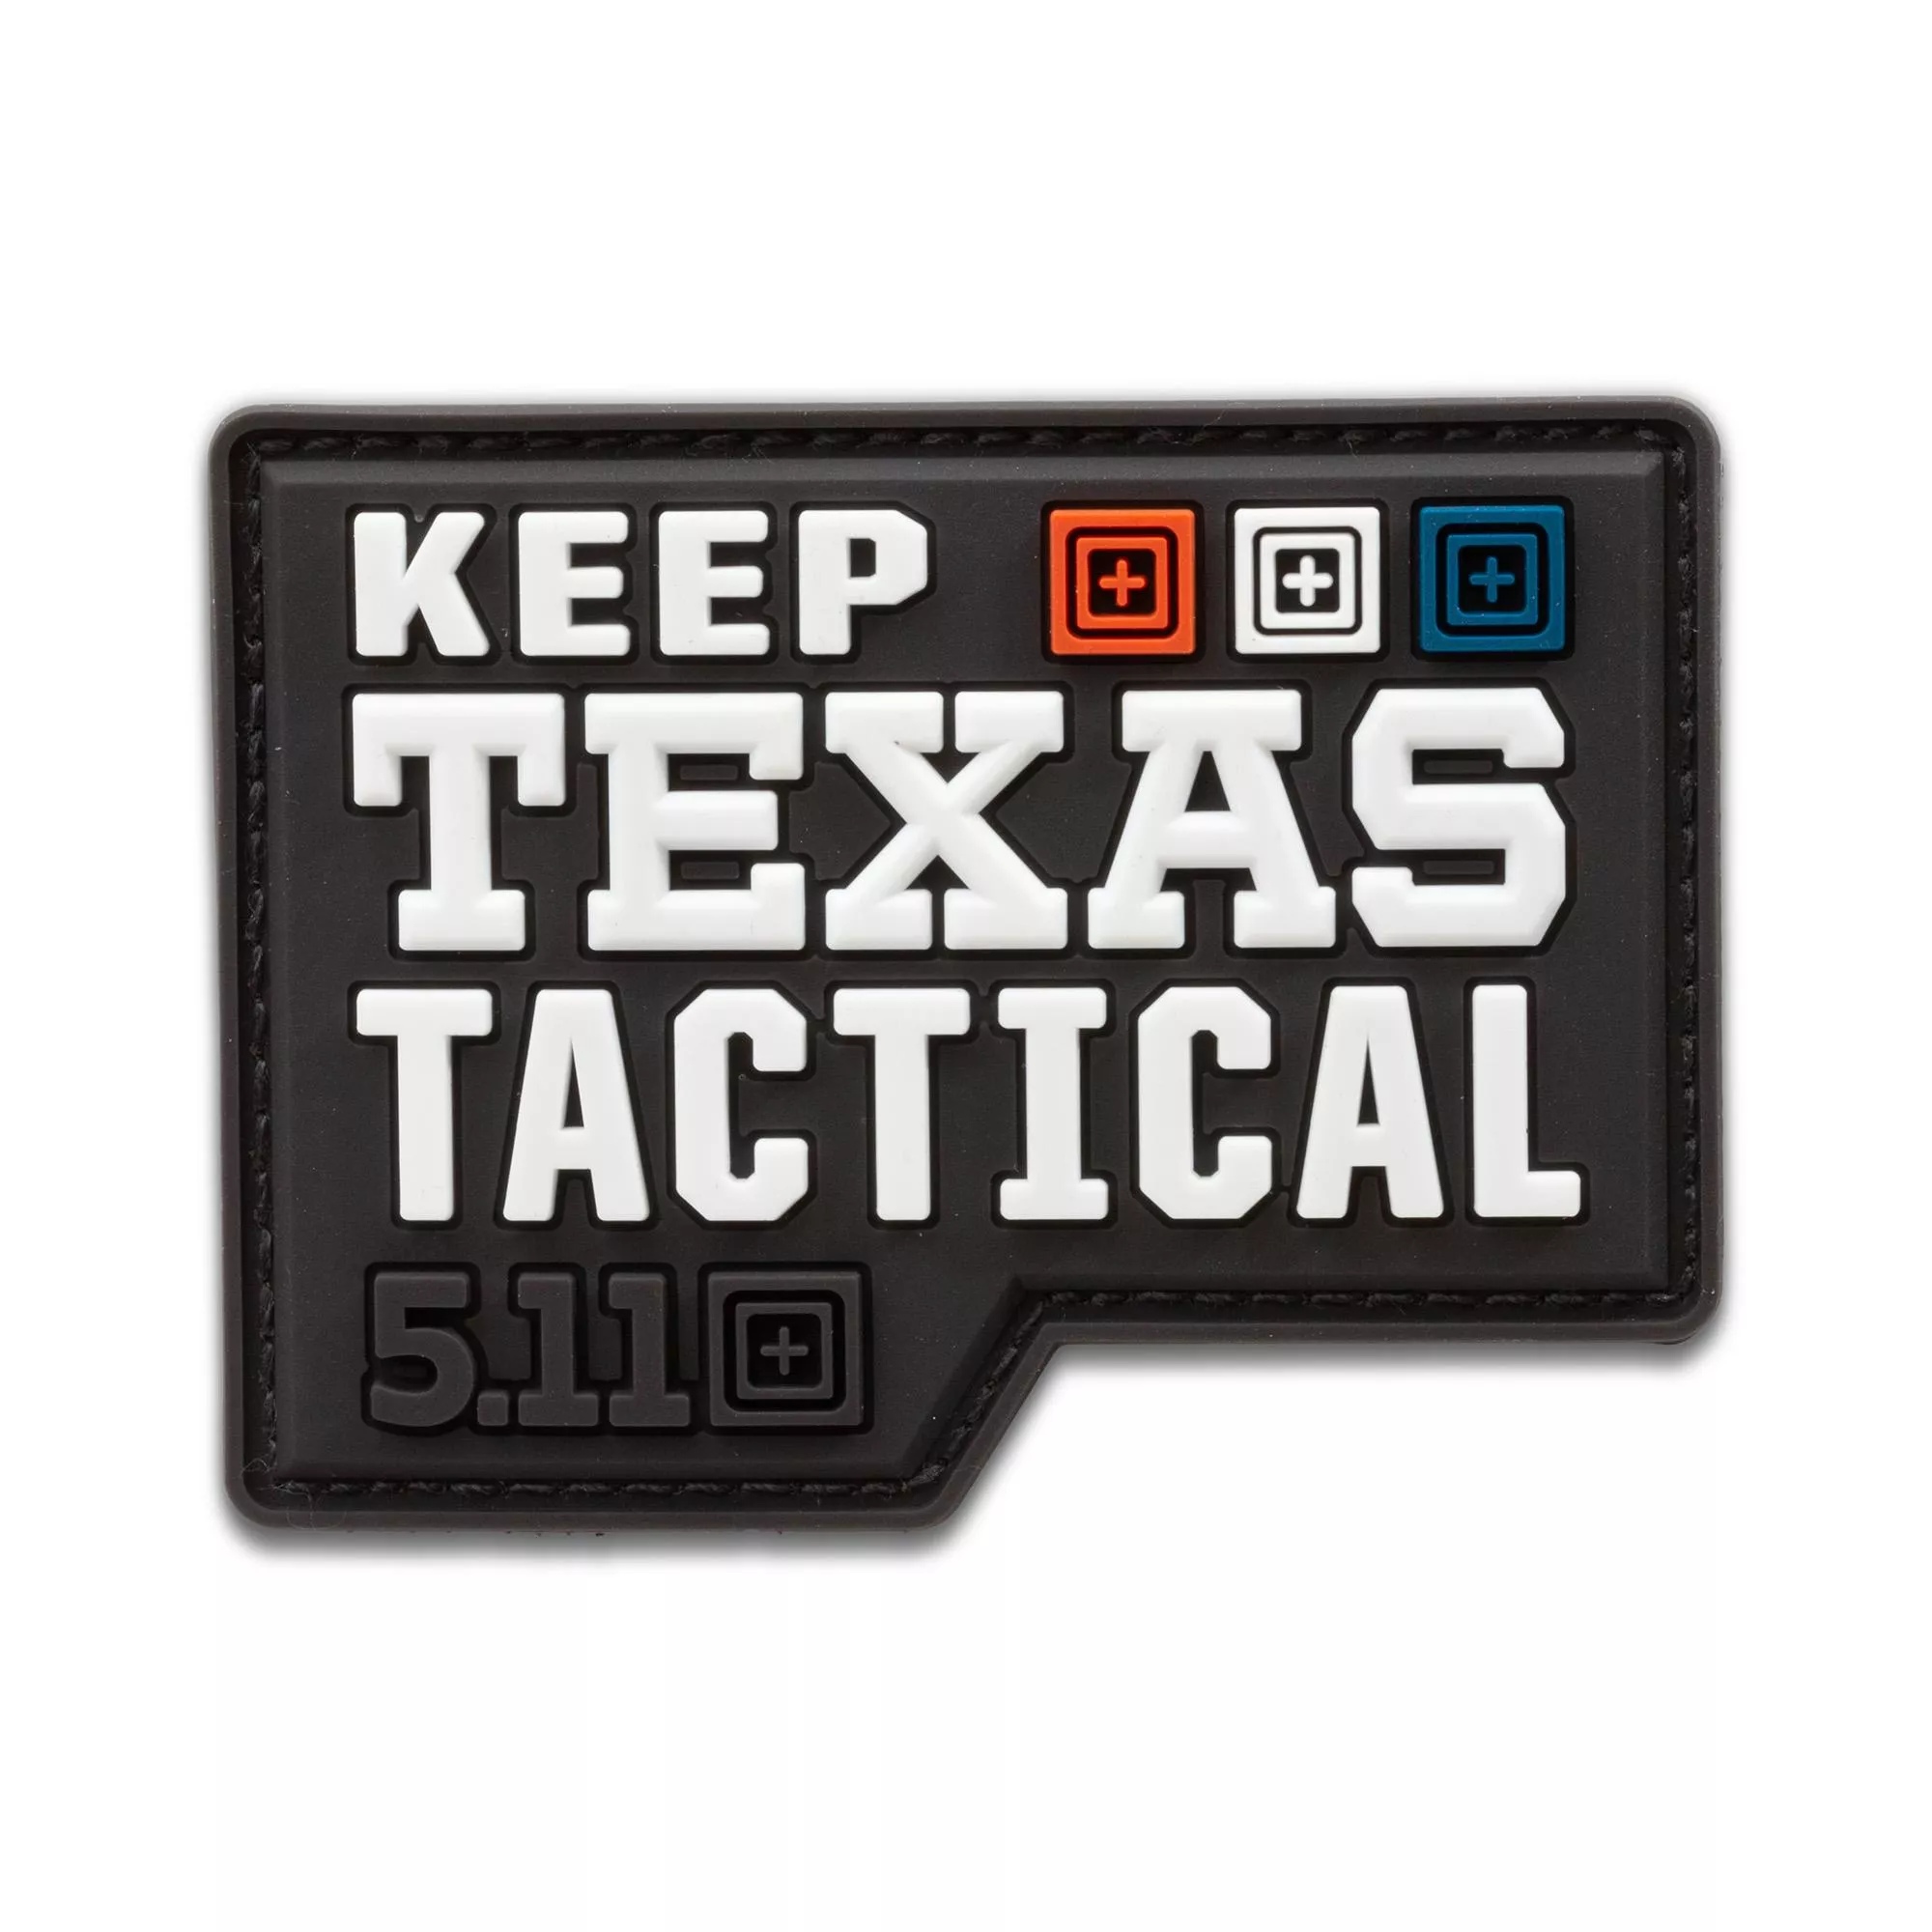 5.11-Keep Texas Tactical V2 Patch 繼續保持 貼章 #92566